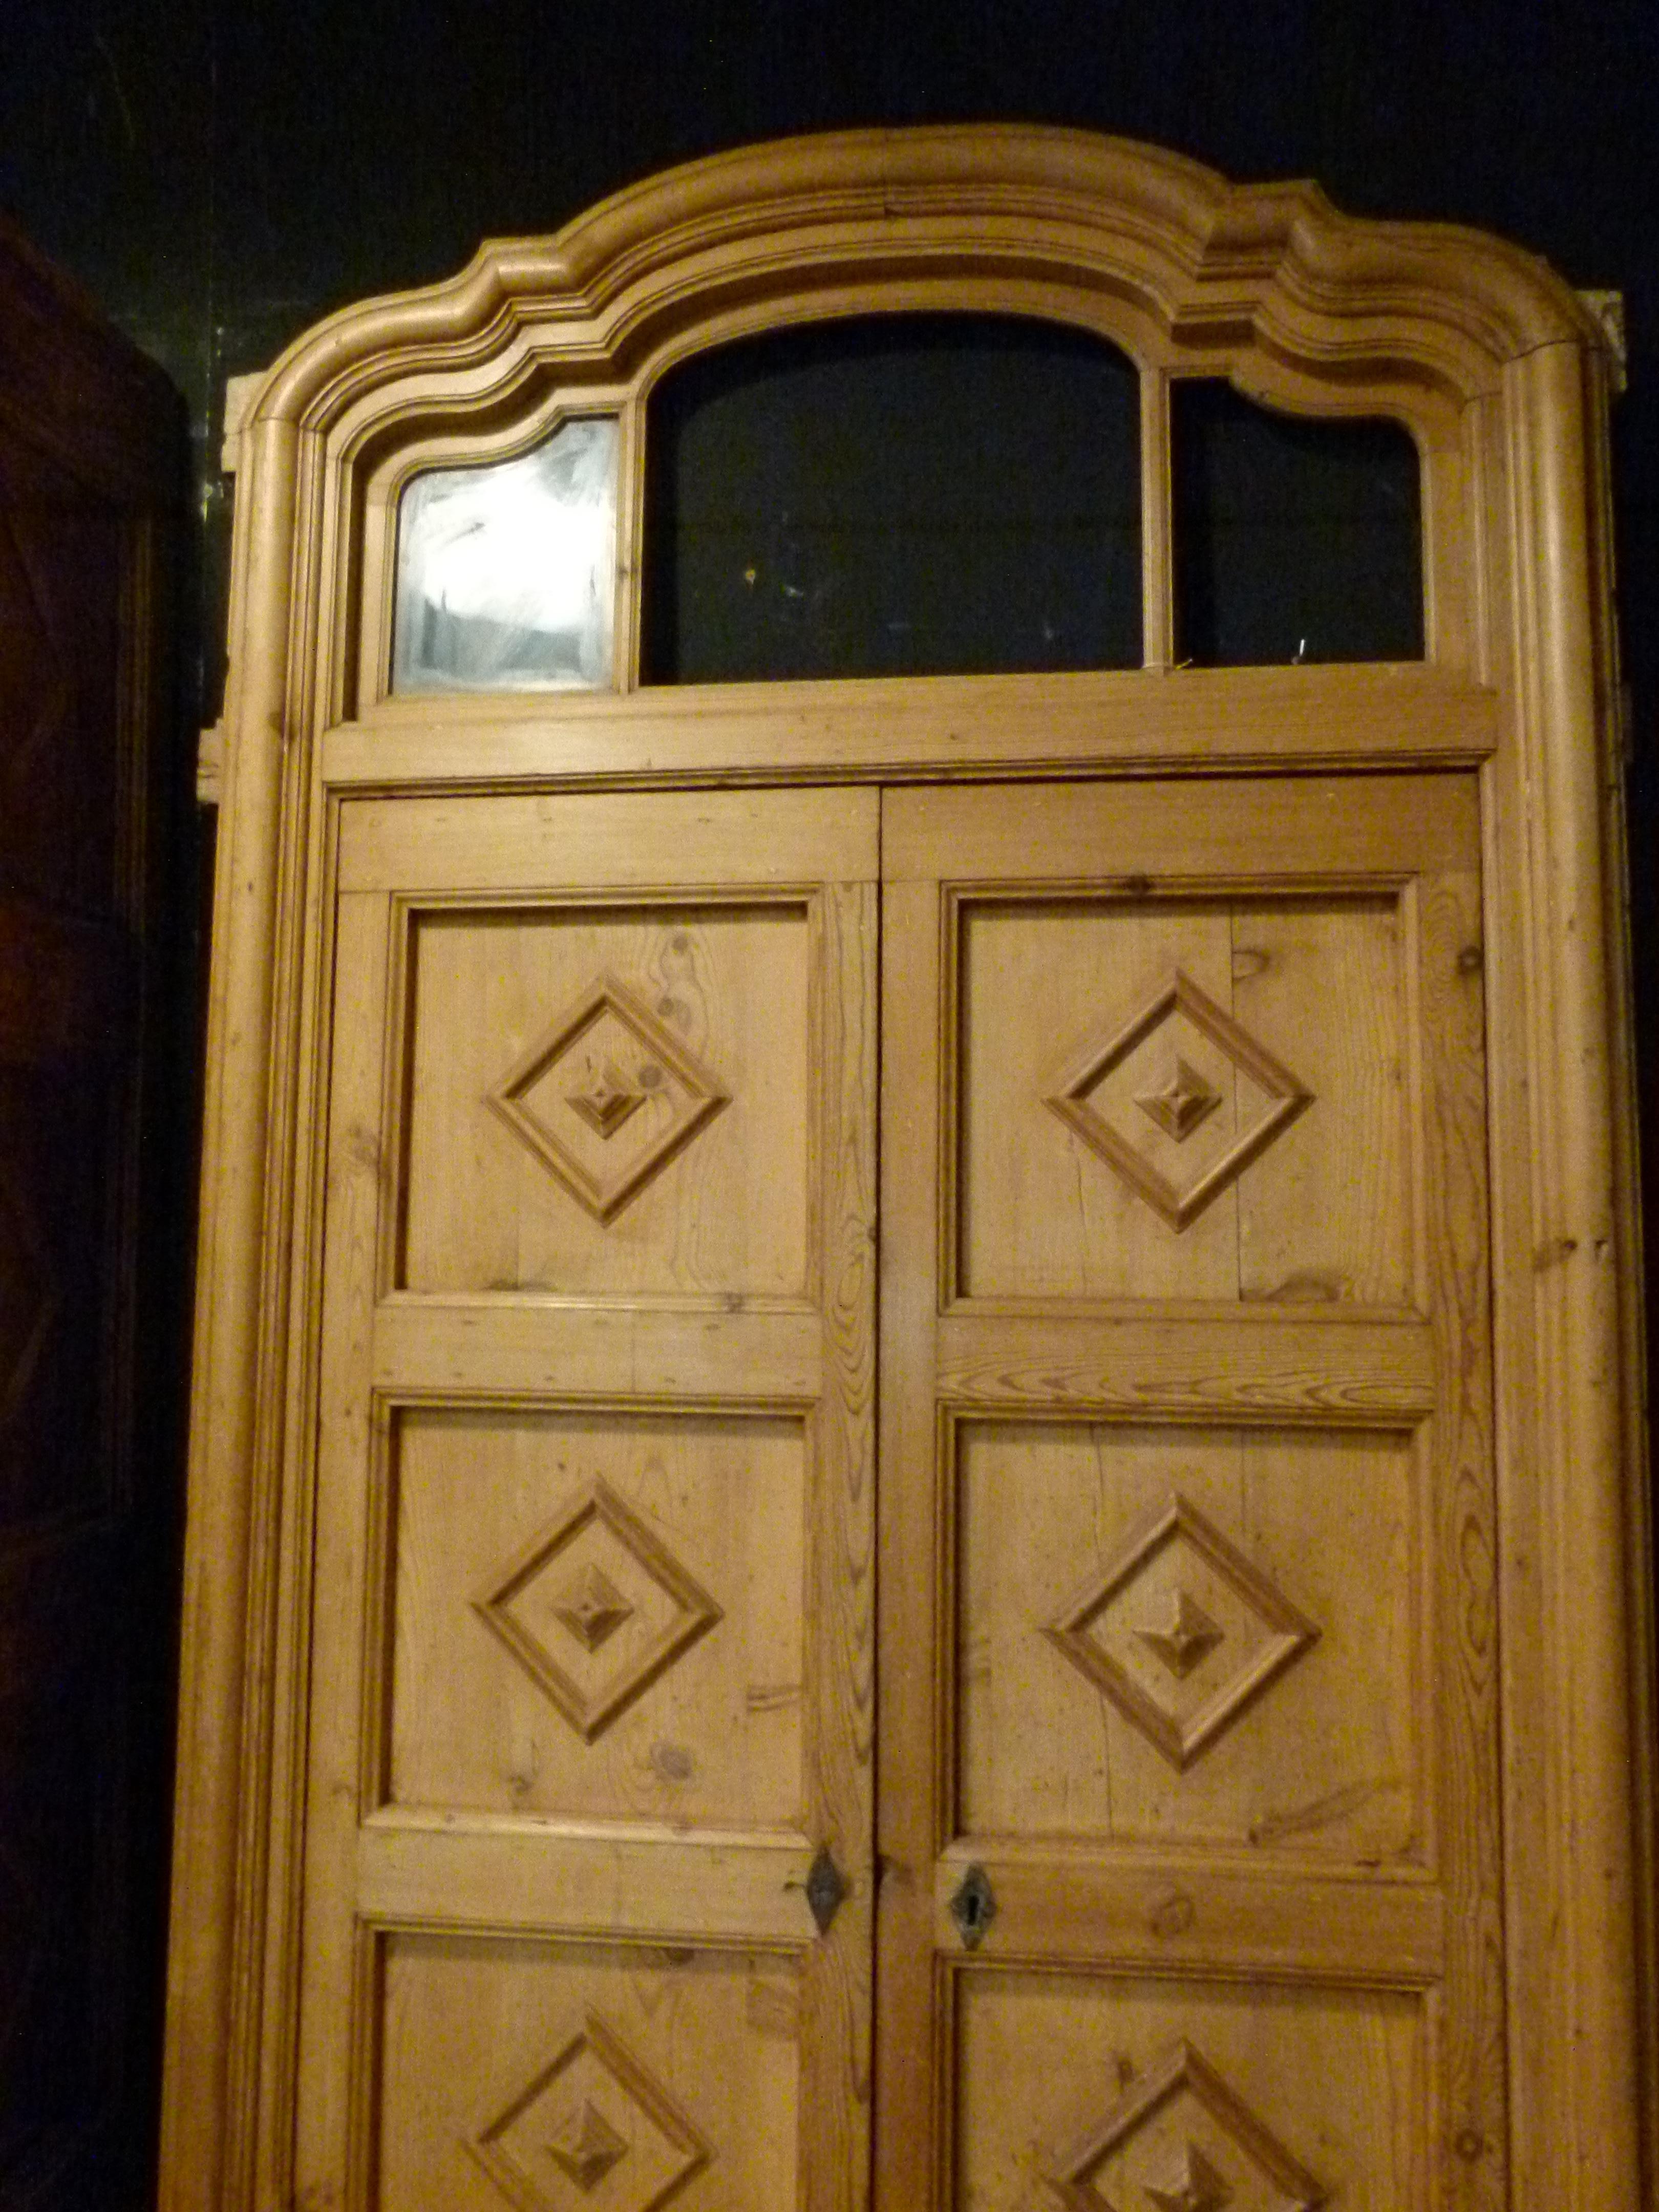 Hard wood front door from the 19th century in Spain. Nice carved decorations with three small glass windows on the top.